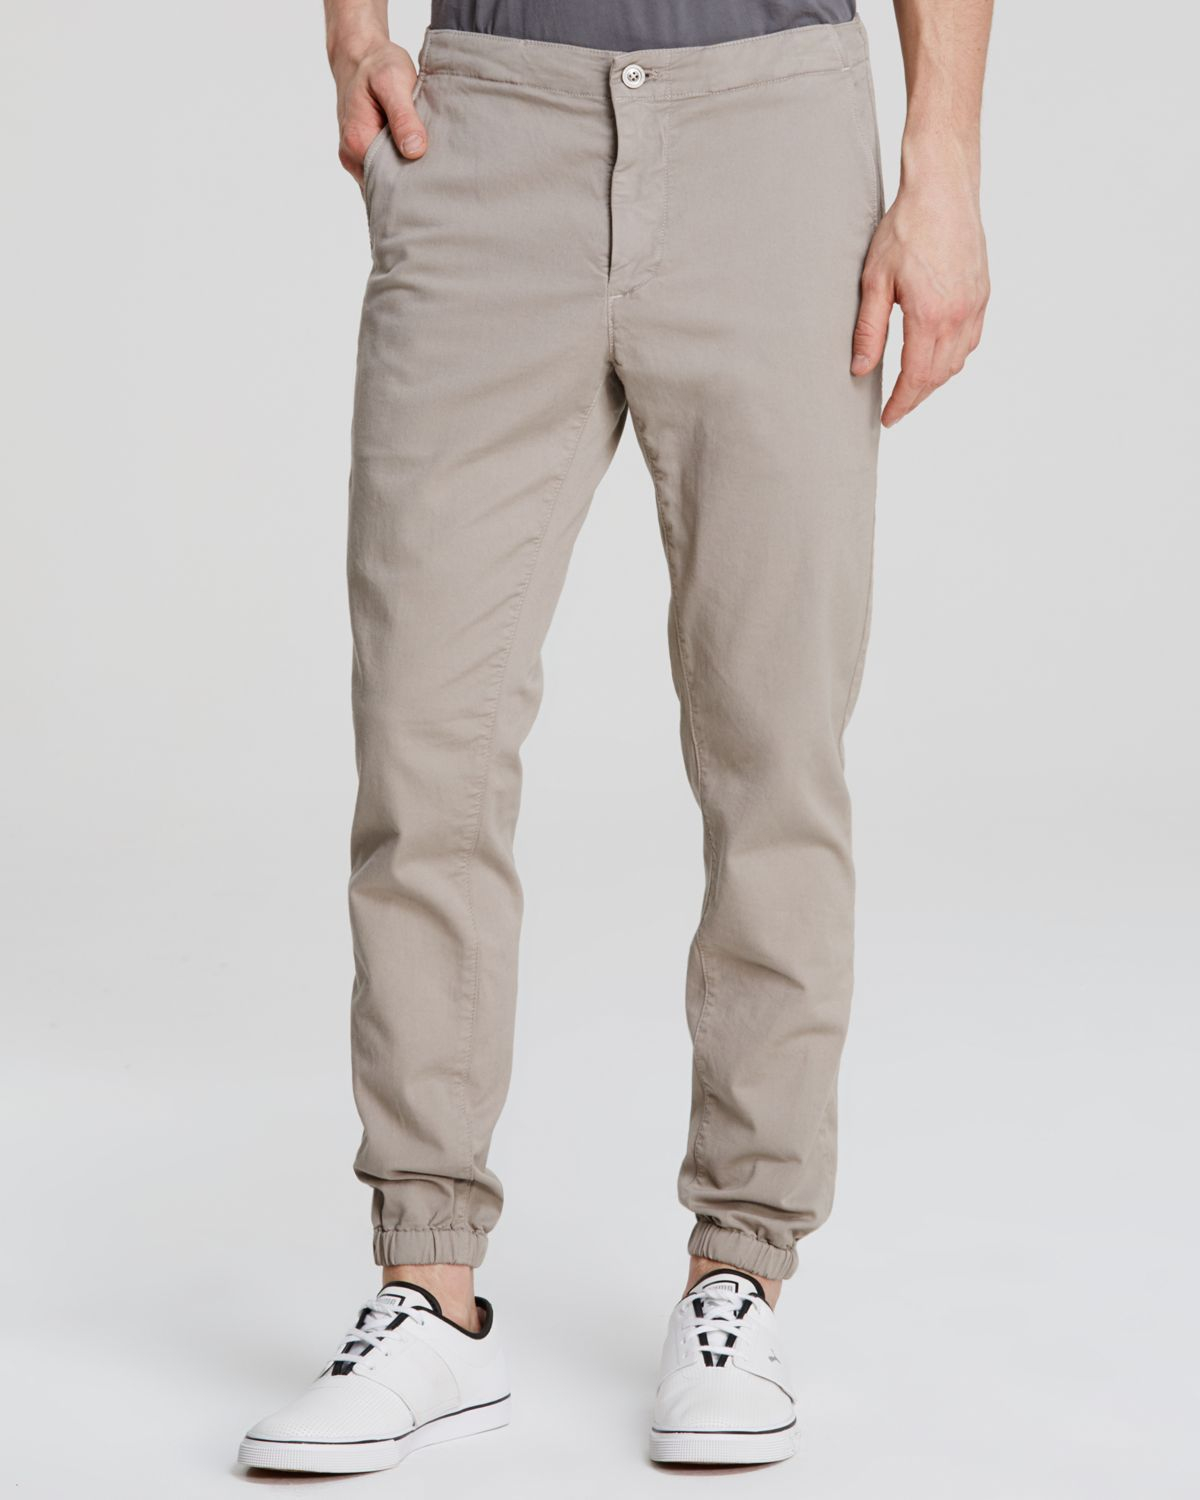 Ag jeans Adriano Goldschmied Rover Travel Chino Jogger Pants in Beige ...